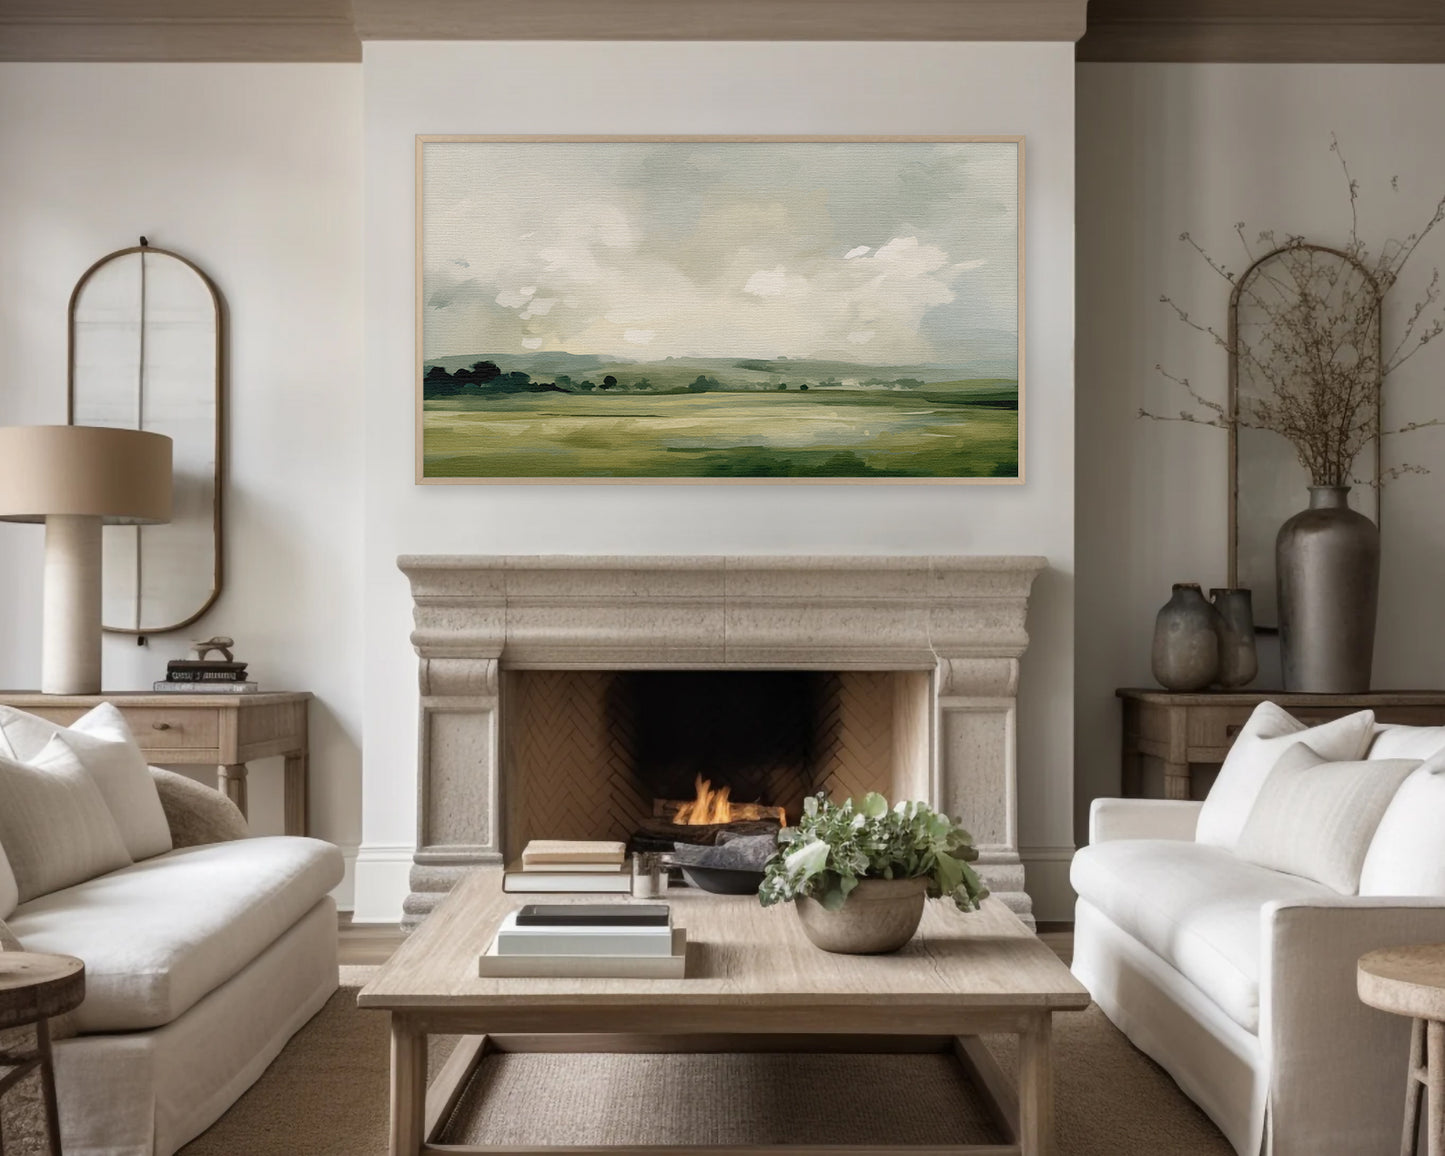 Abstract Landscape Frame TV Art Country Farmhouse Wallpaper